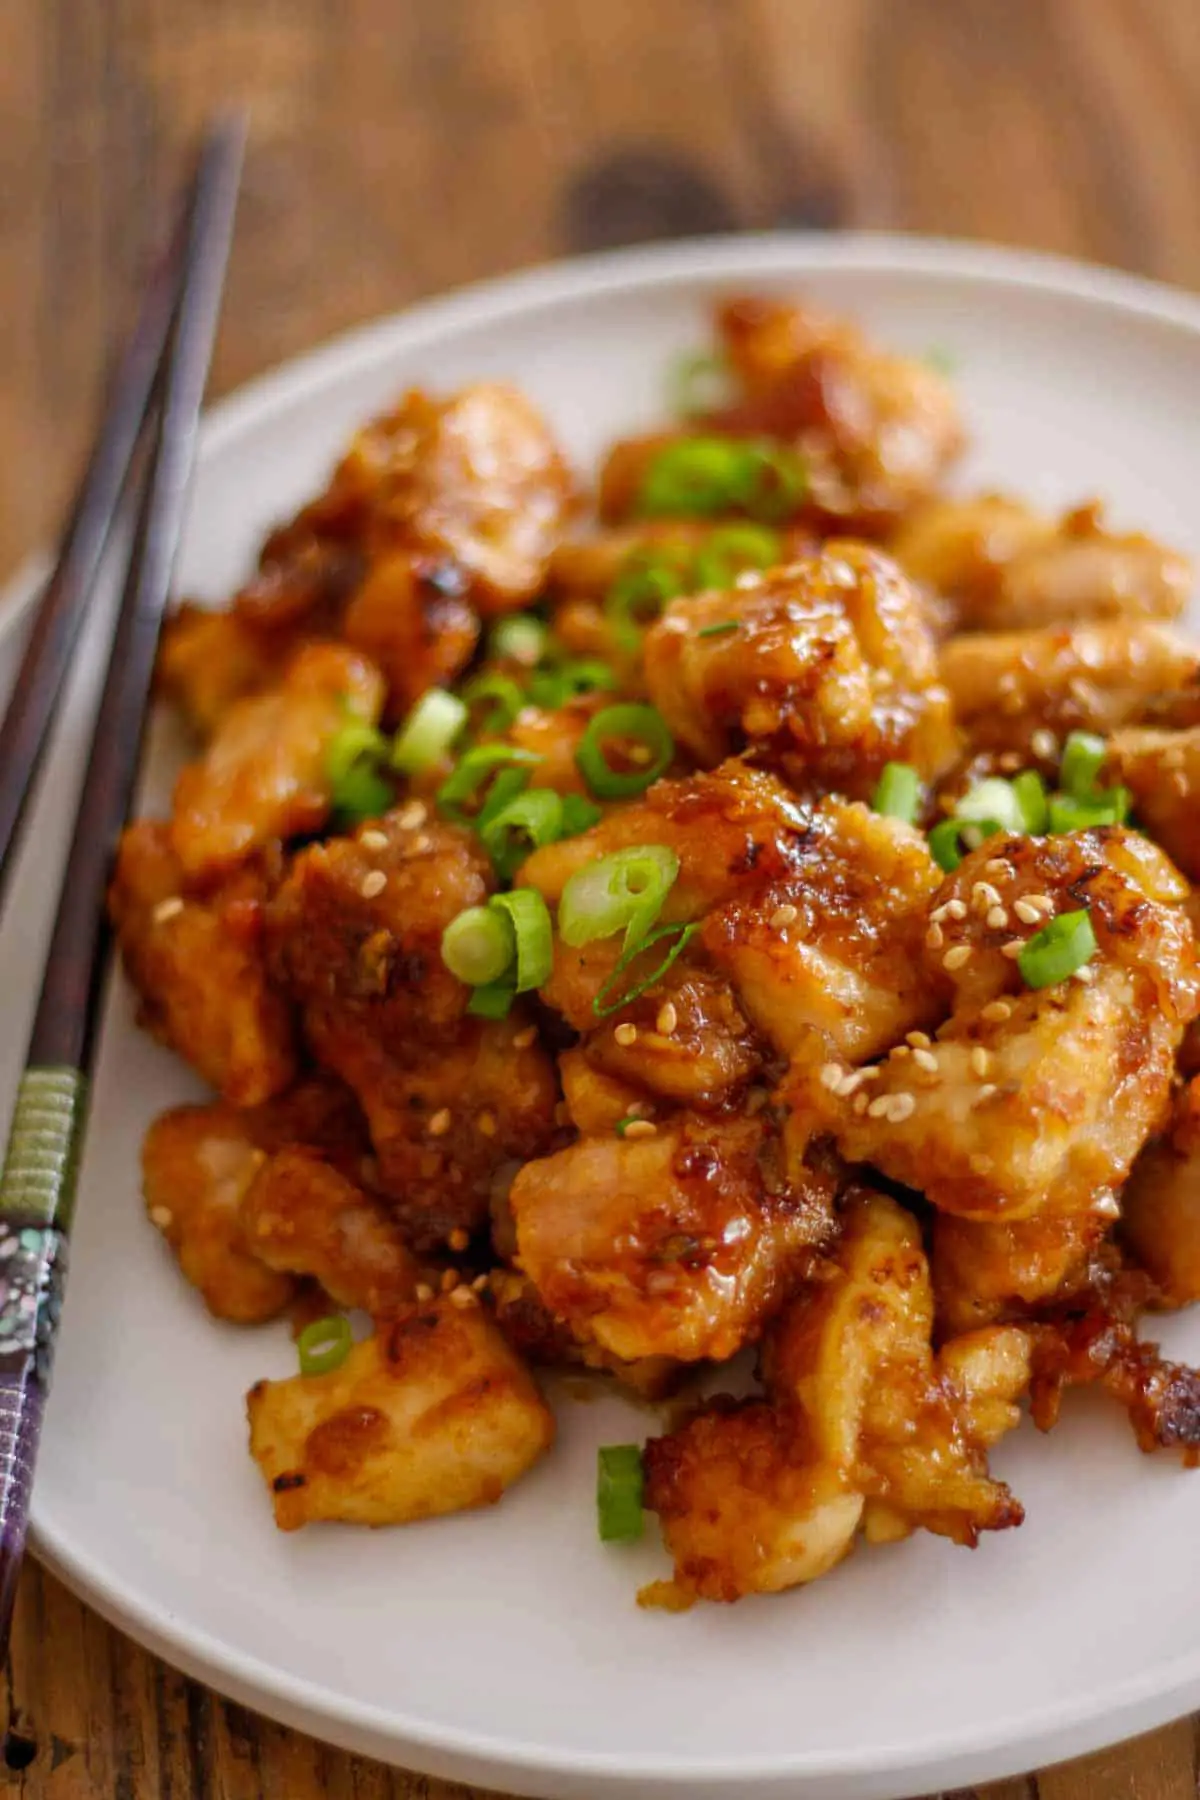 Chicken pieces with a sticky sauce on a white plate garnished with green onions and a pair of chopsticks resting on the side of the plate.